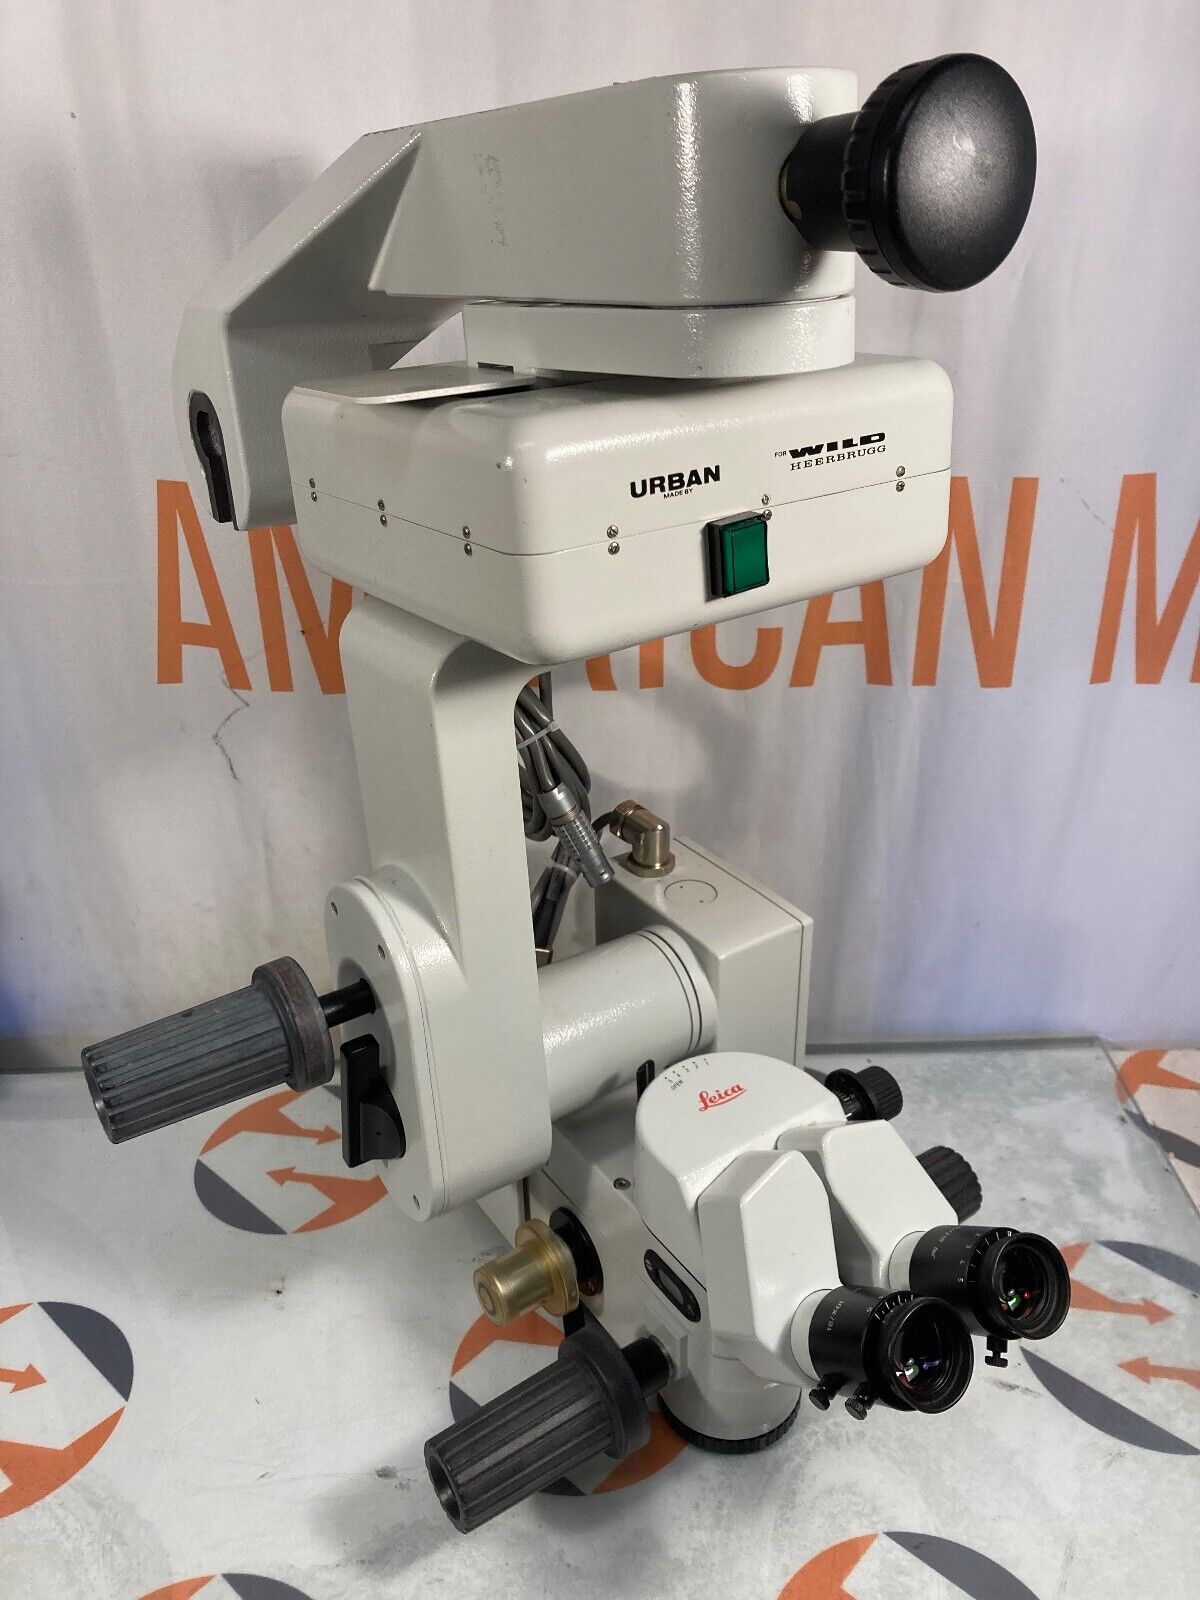 Leica Wild M690 Surgical Microscope System